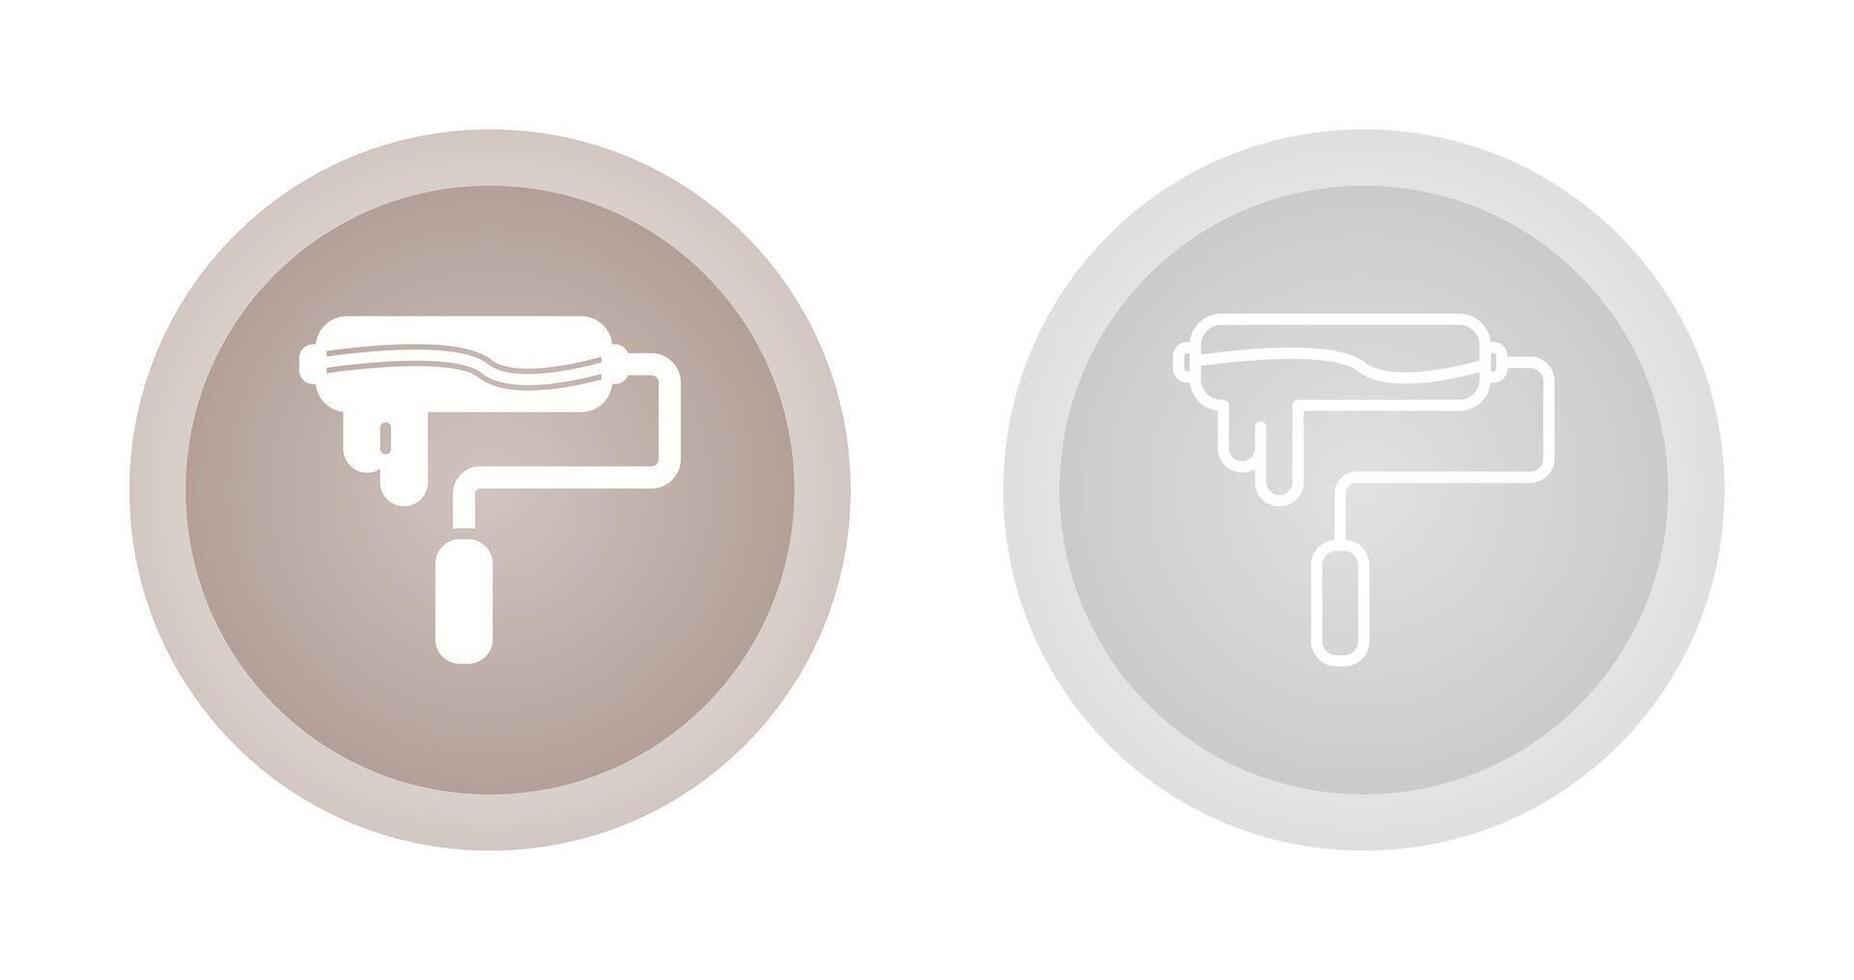 Paint Roller Vector Icon